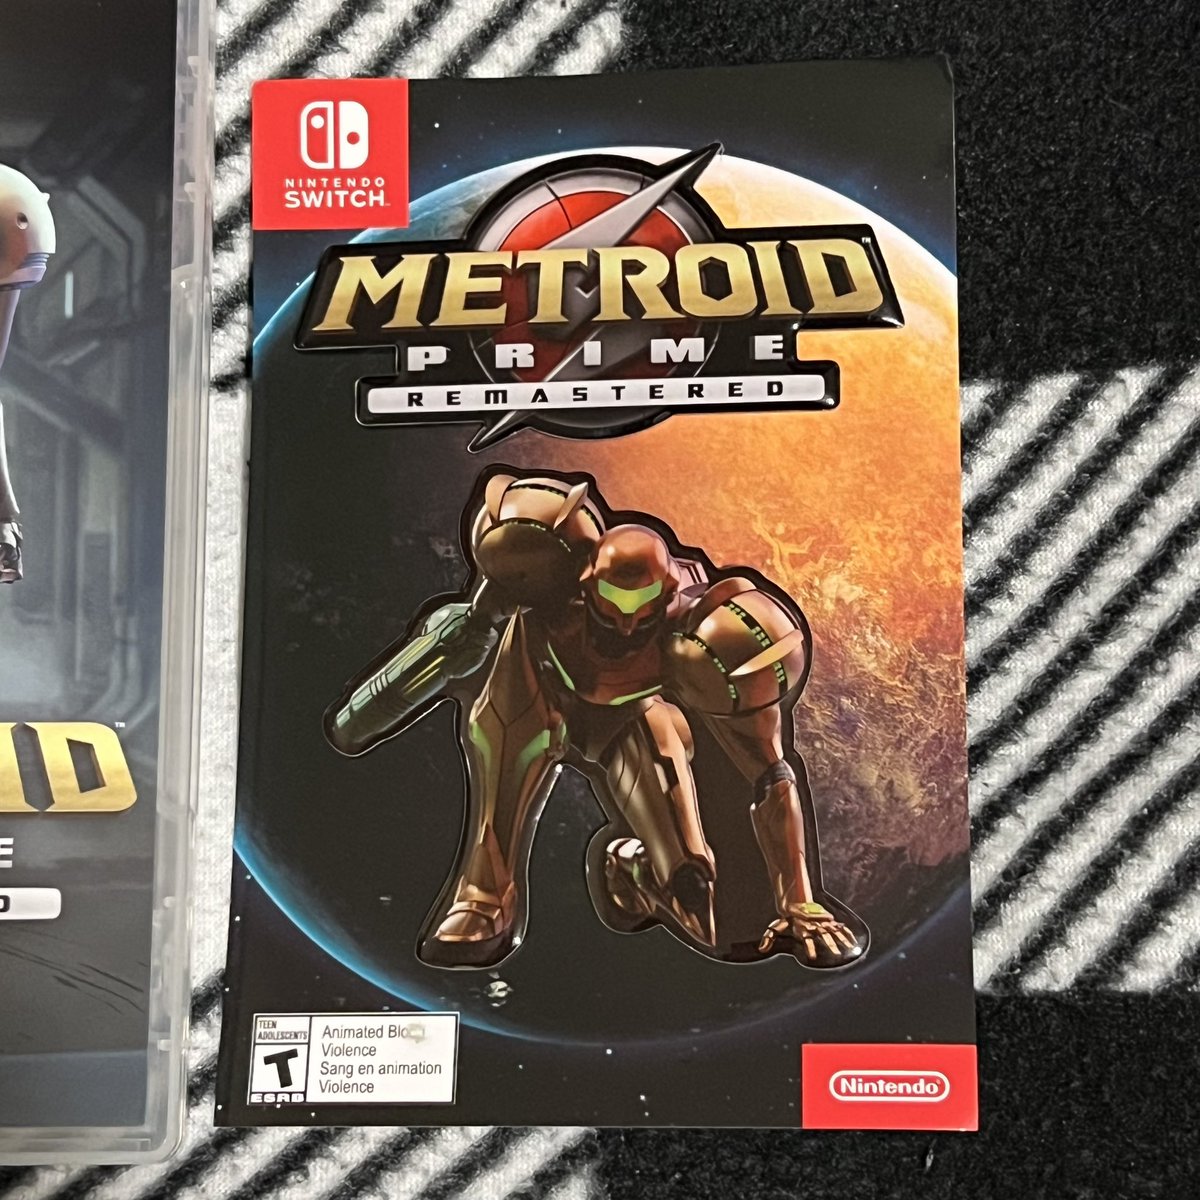 Also got Metroid Prime Remastered along with the MyNintendo giant pin set! Hopefully we get the other two Prime games leading up to the long awaited Metroid Prime 4!

#MetroidPrimeRemastered #MetroidPrime #Metroid #MyNintendo #NintendoSwitch #Nintendo